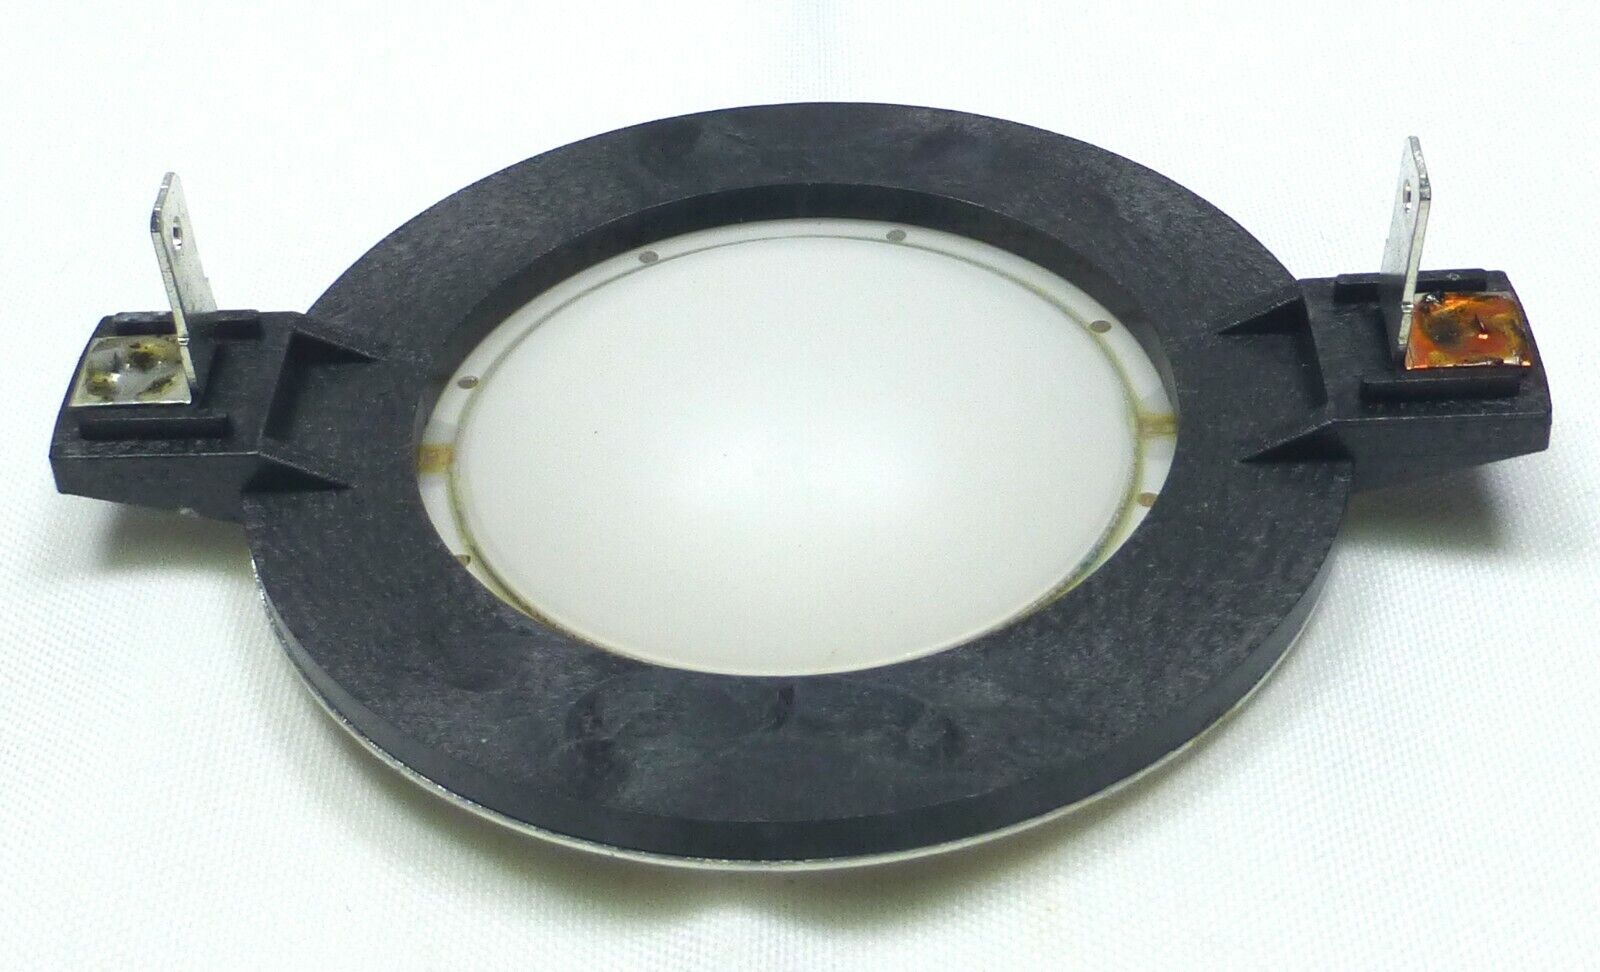 Replacement Diaphragm for EAW CD-3502 P/N 803042, EAW 15410081, 15510083